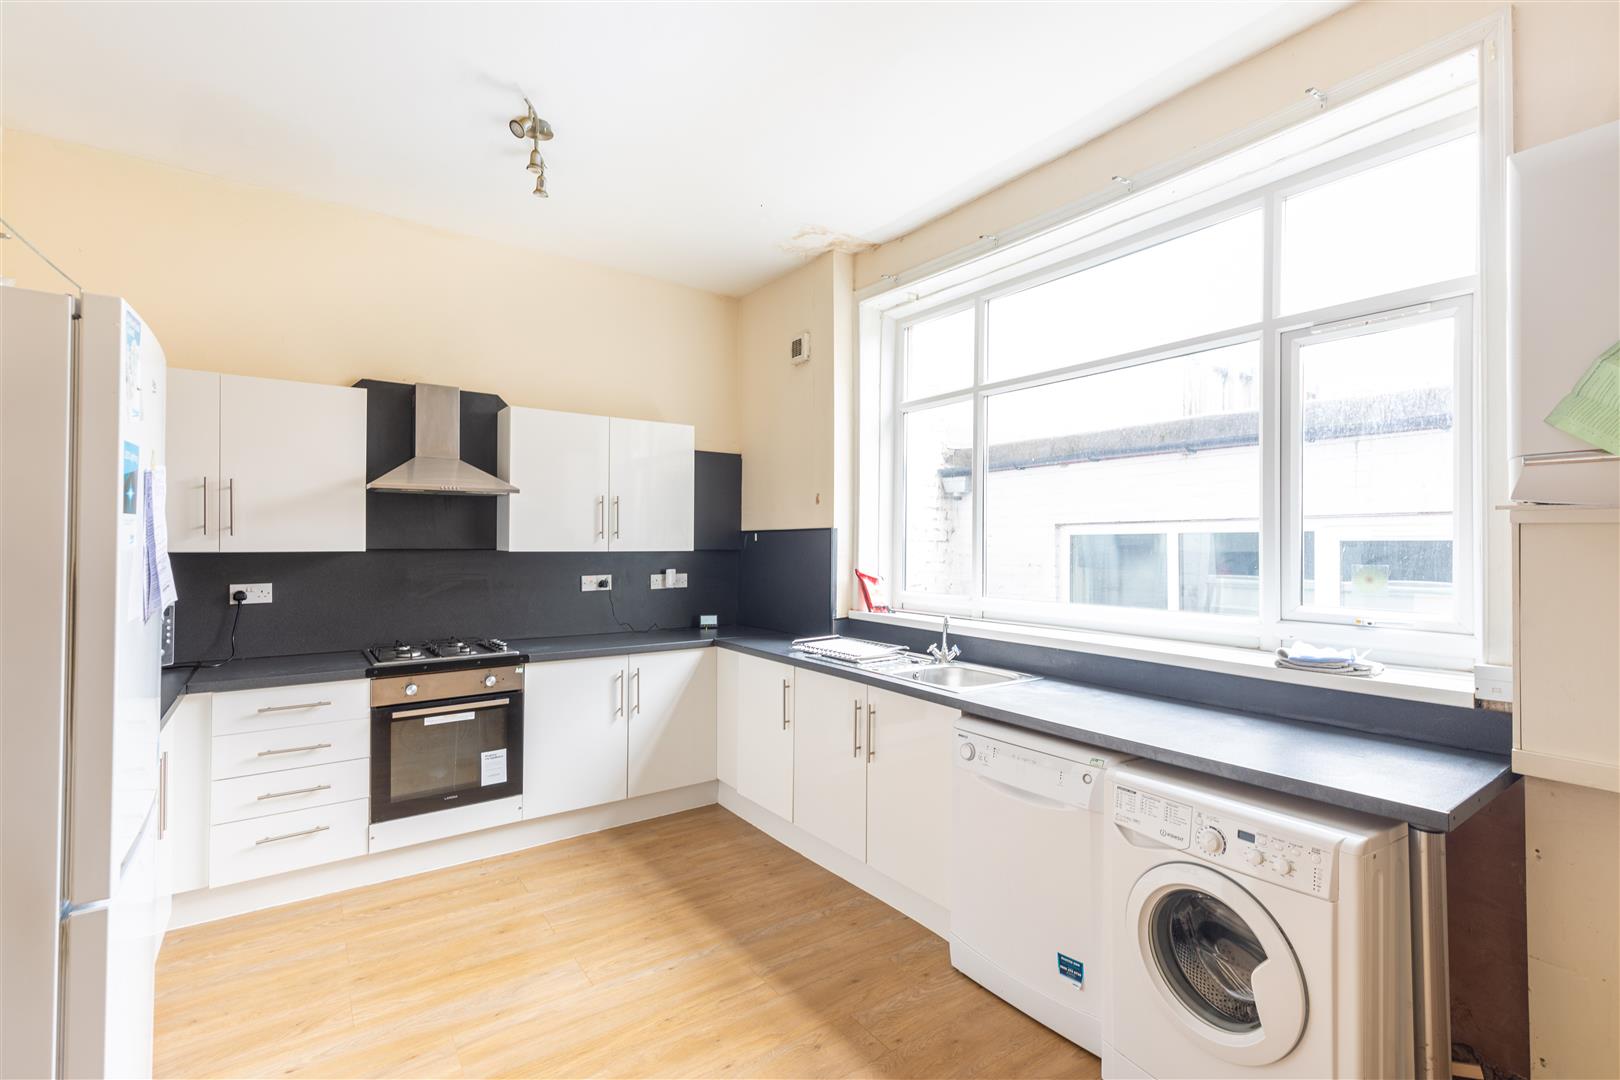 5 bed terraced house to rent in Chillingham Road, Newcastle Upon Tyne - Property Image 1